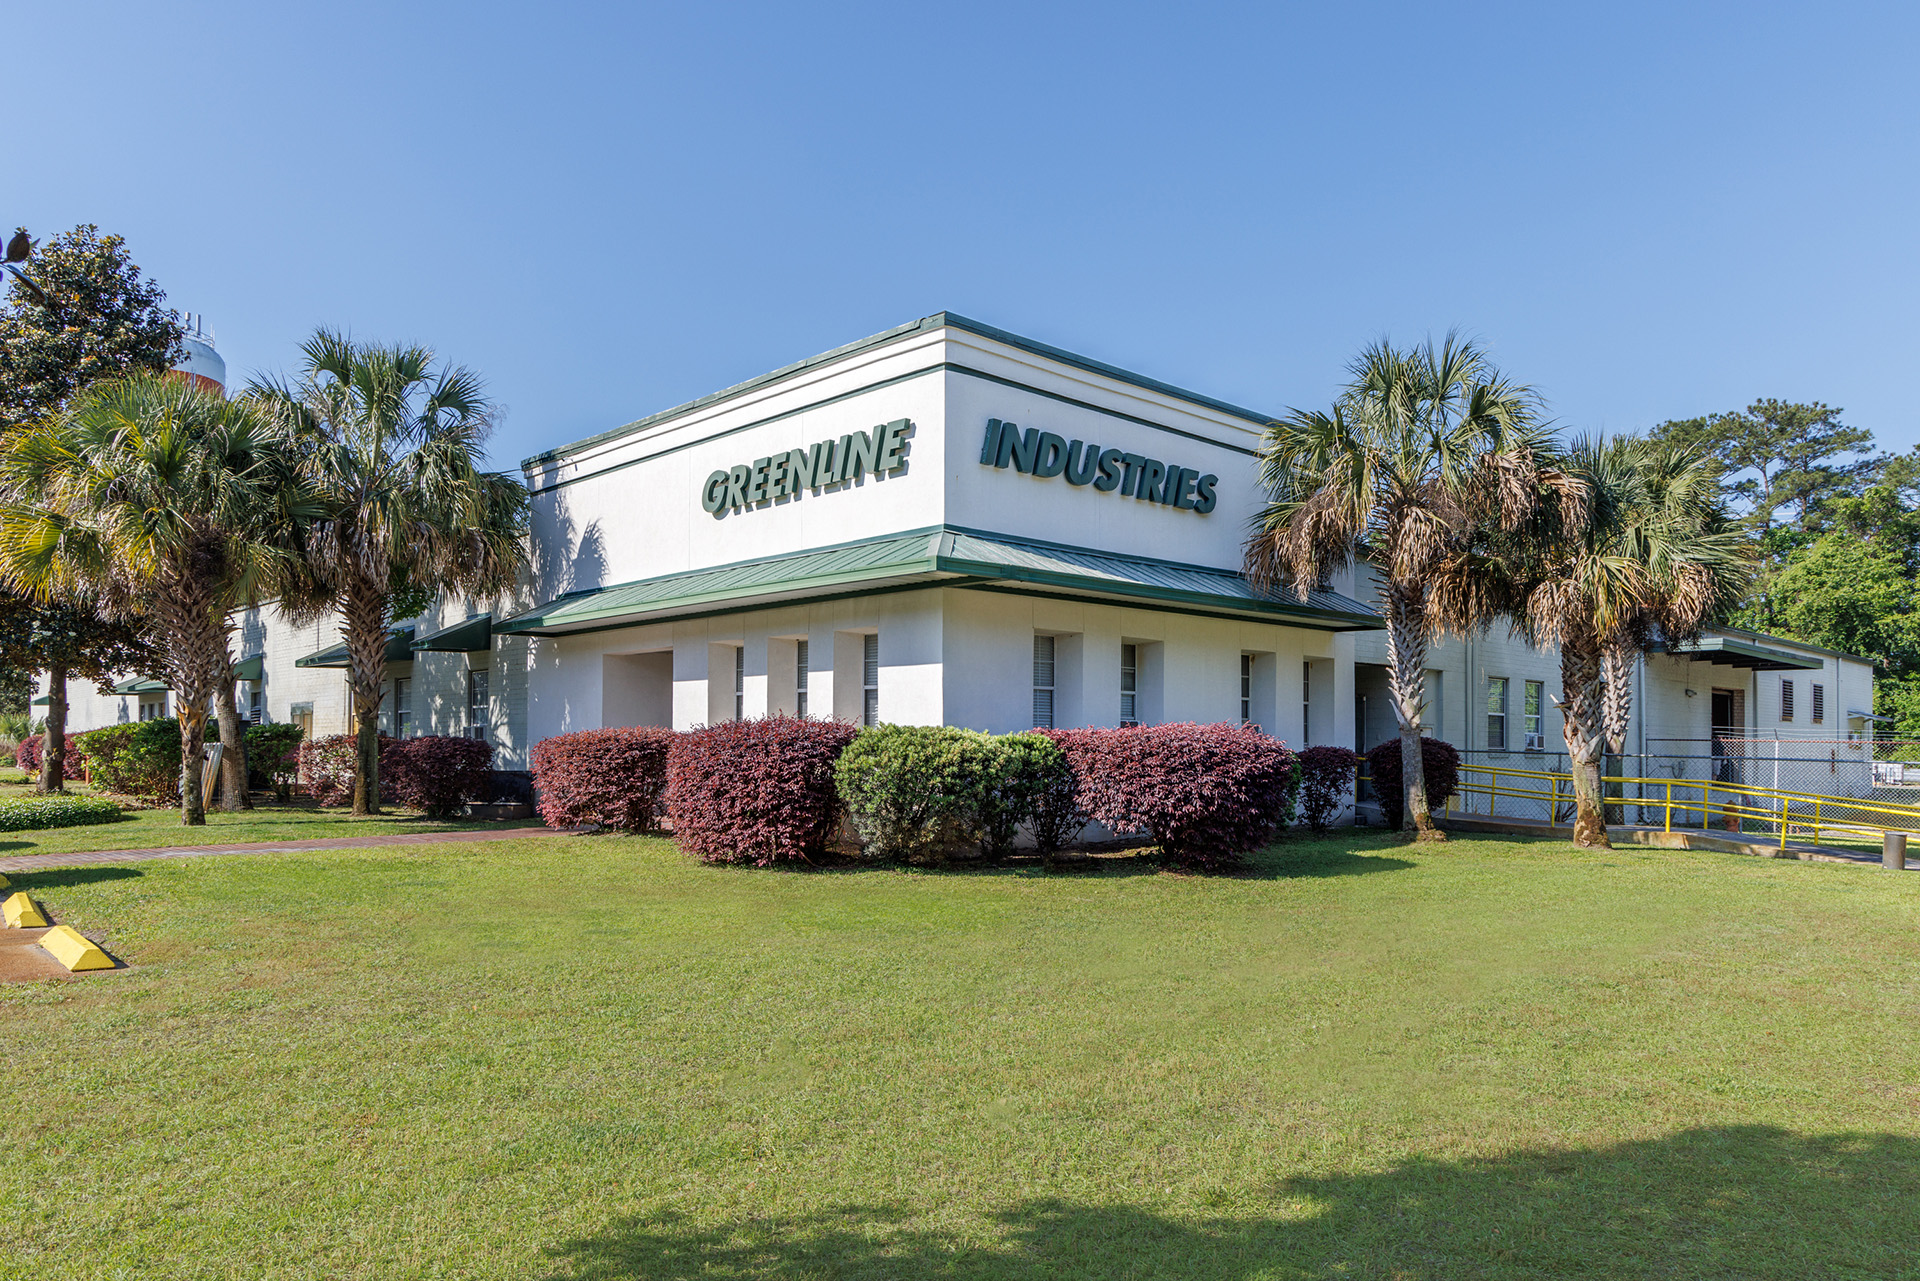 Greenline Industries plant located in Beaufort, SC